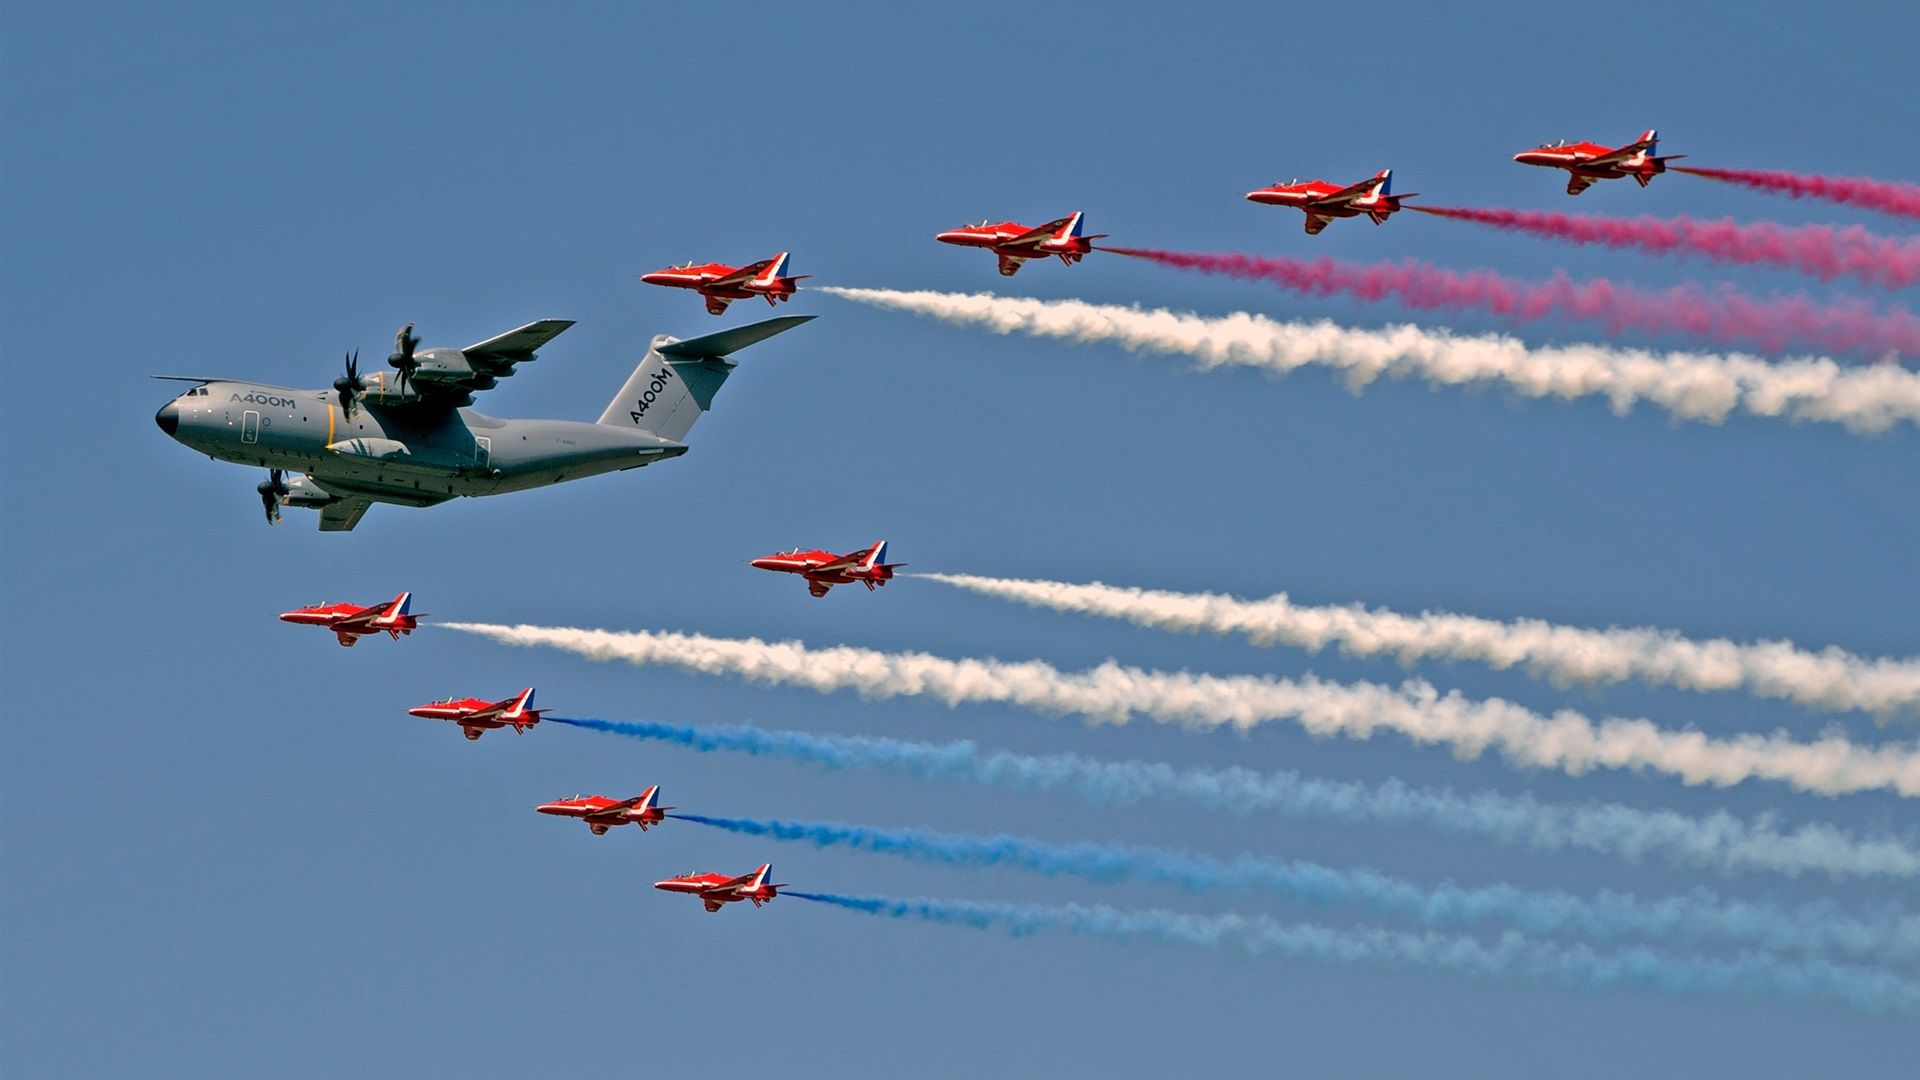 Wallpaper Royal Air Force, Red Arrows fighters, transport aircraft 1920x1440 HD Picture, Image